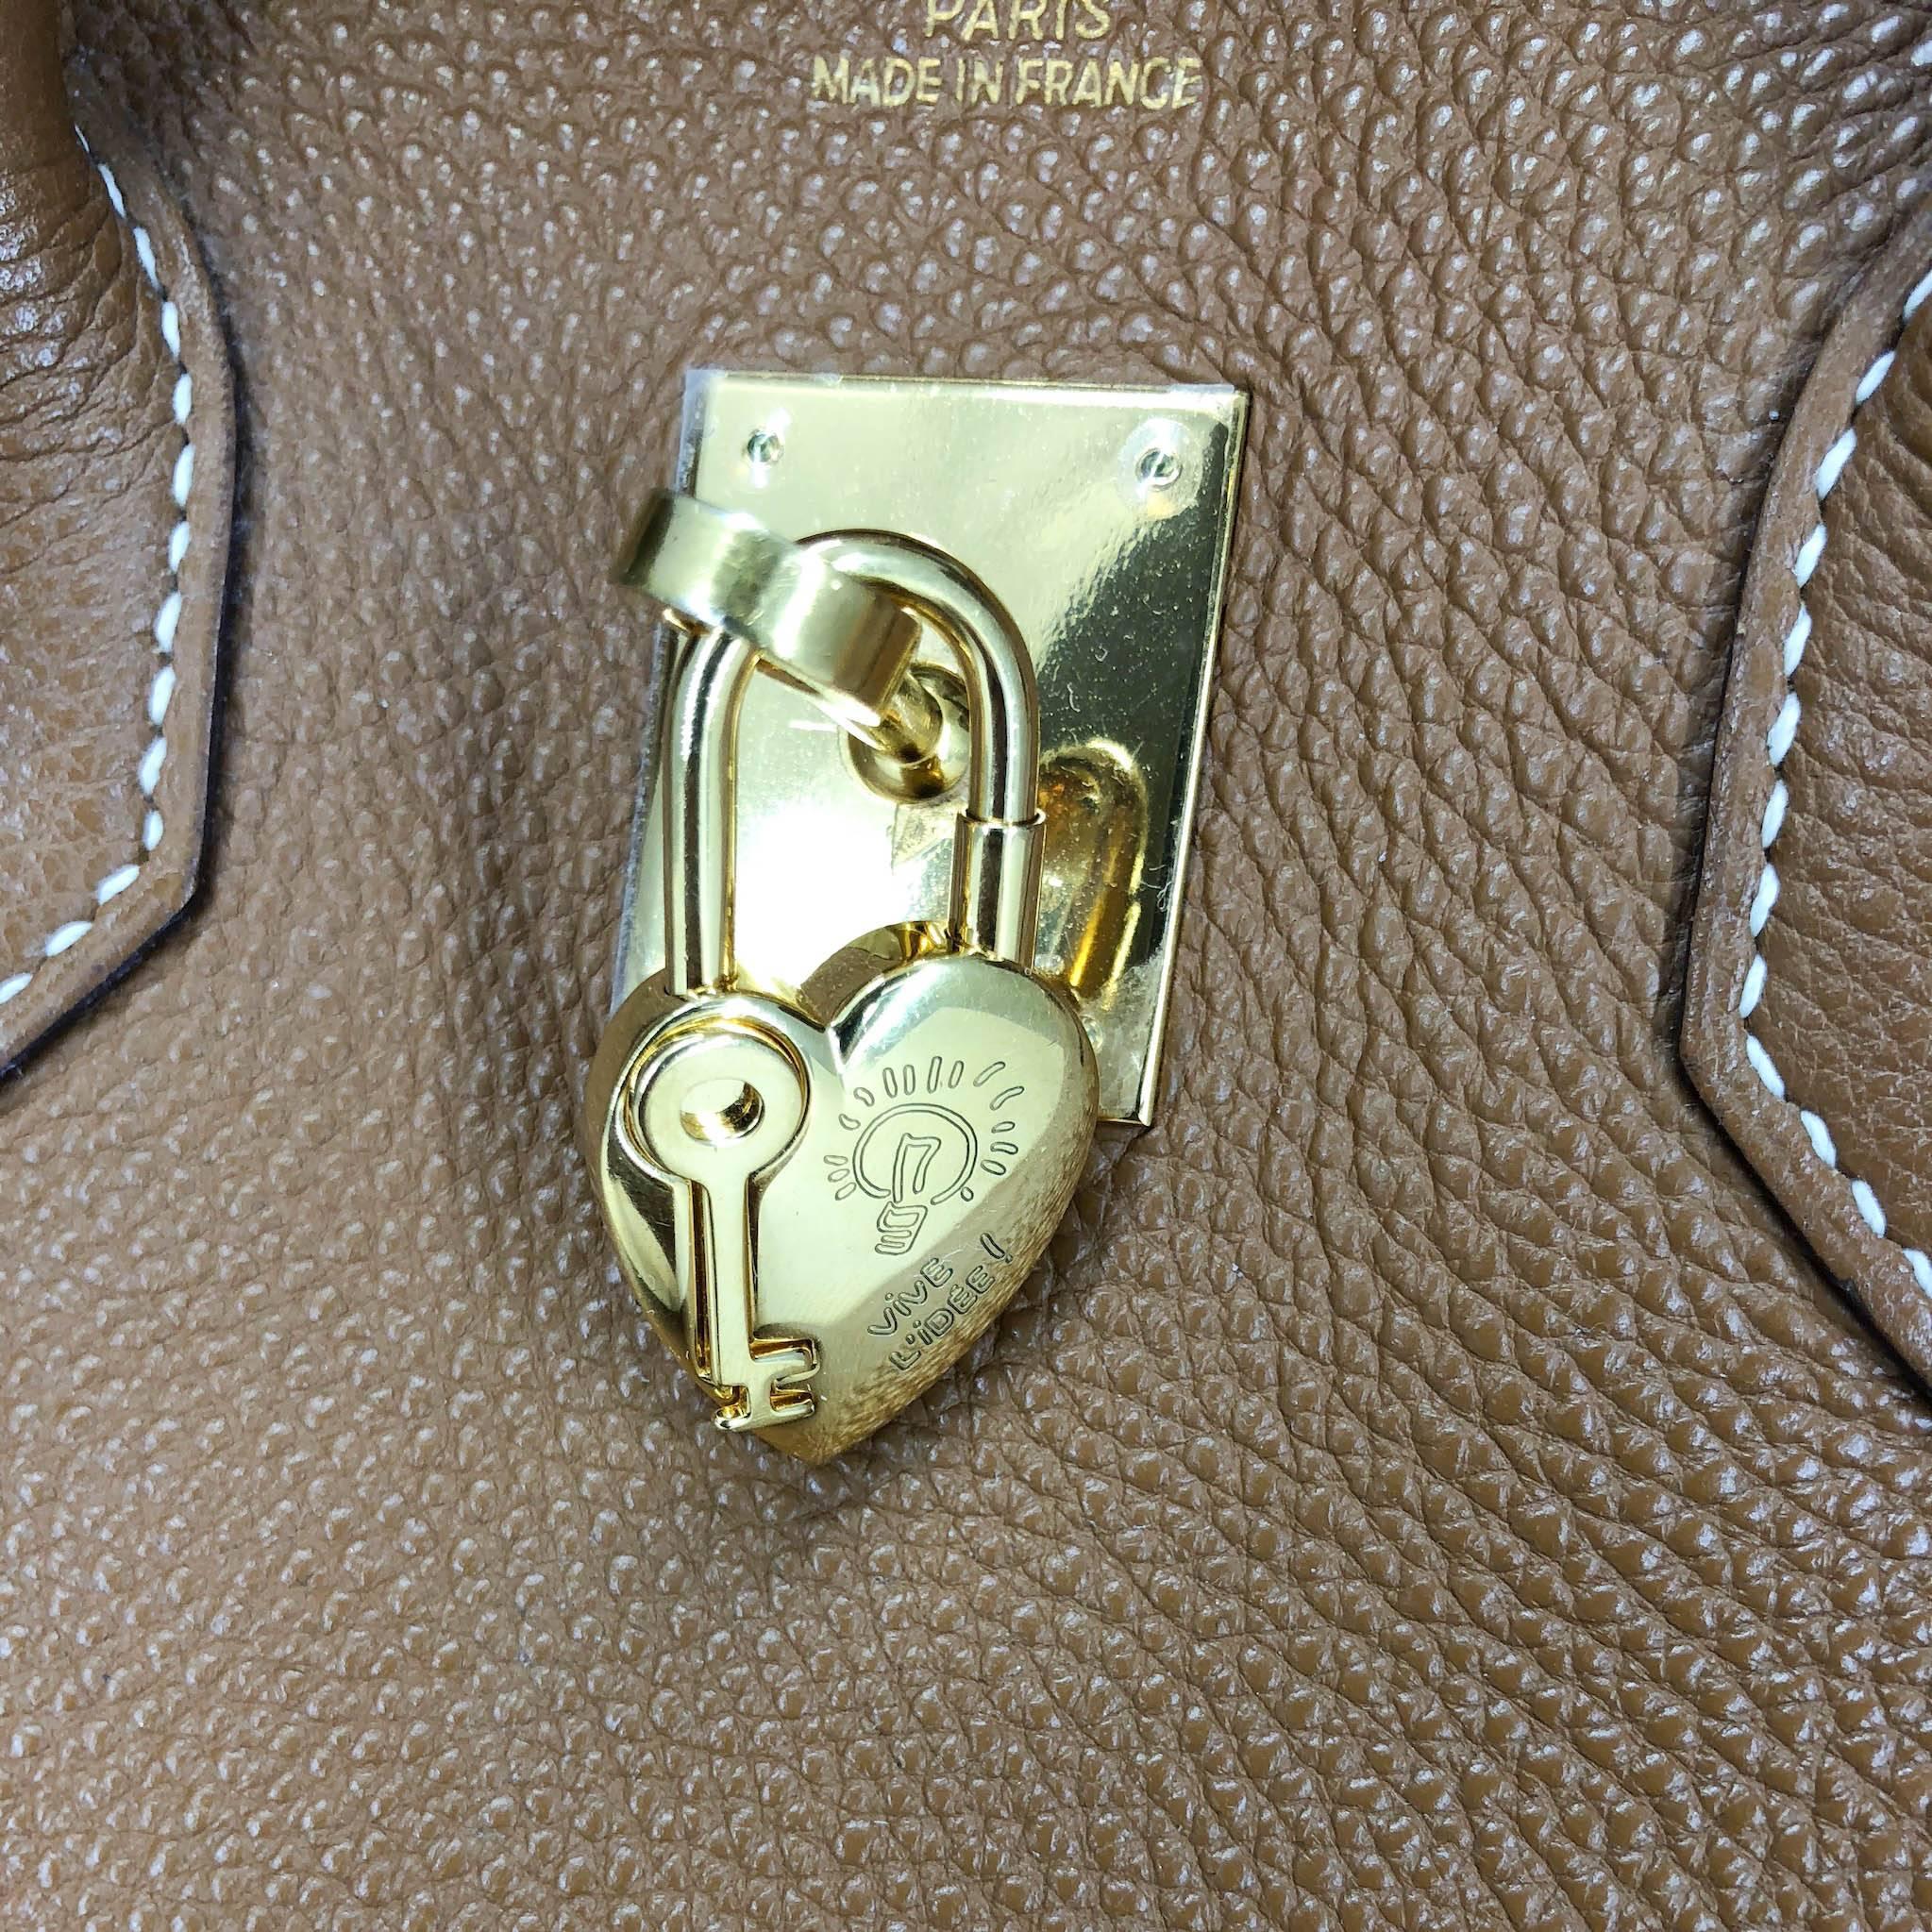 Hermes Handbag Birkin 35 in Gold Clemence Leather with Gold Hardware (ghw) For Sale 8